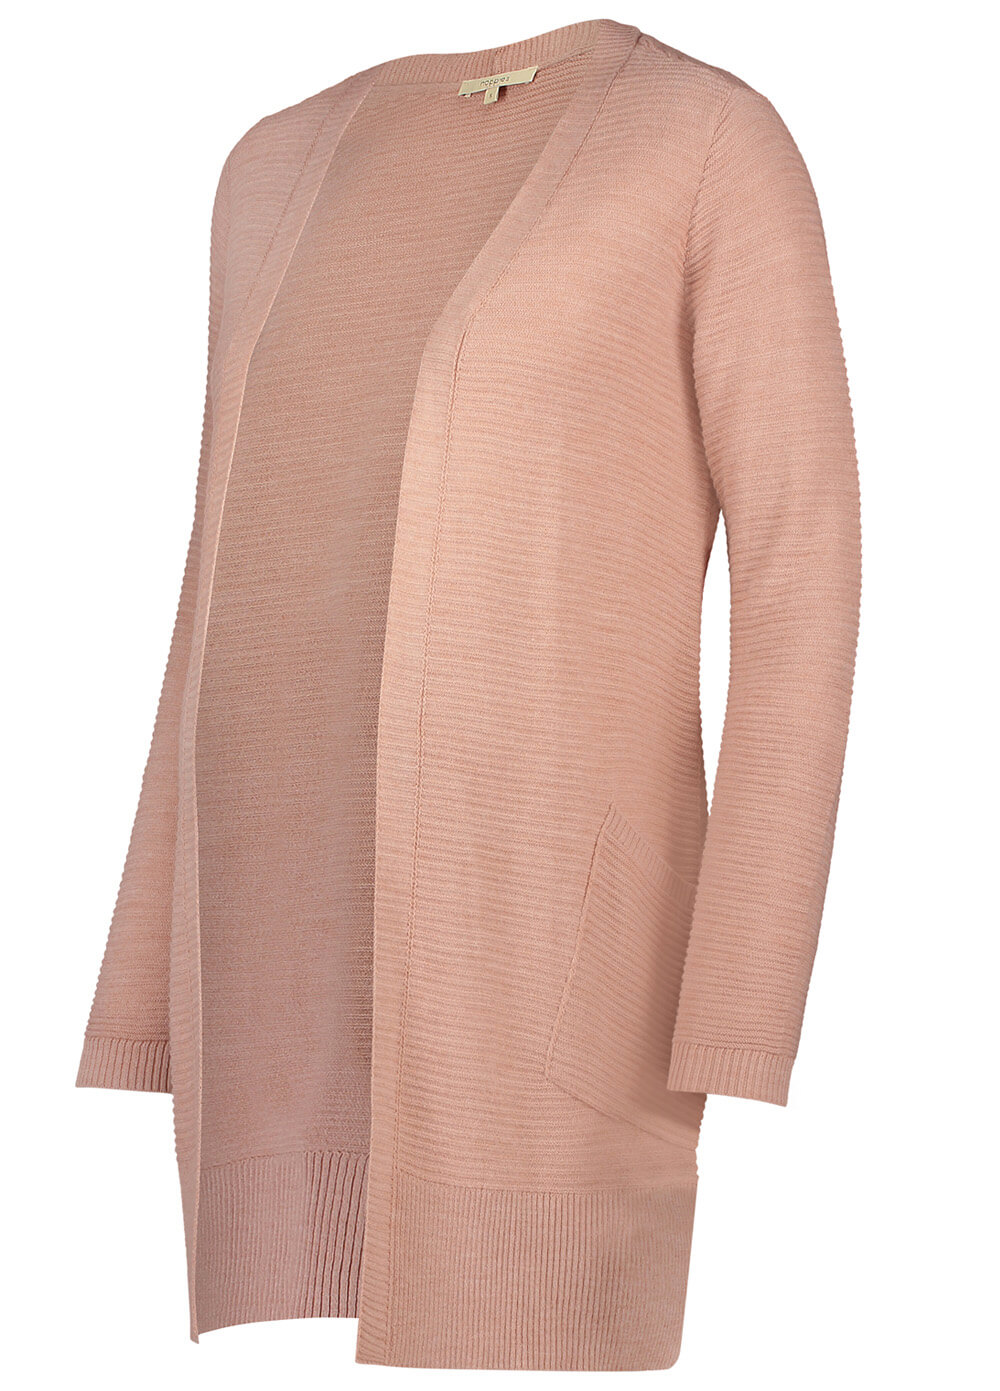 Alexis Ribbed Knit Maternity Cardigan in Blush by Noppies